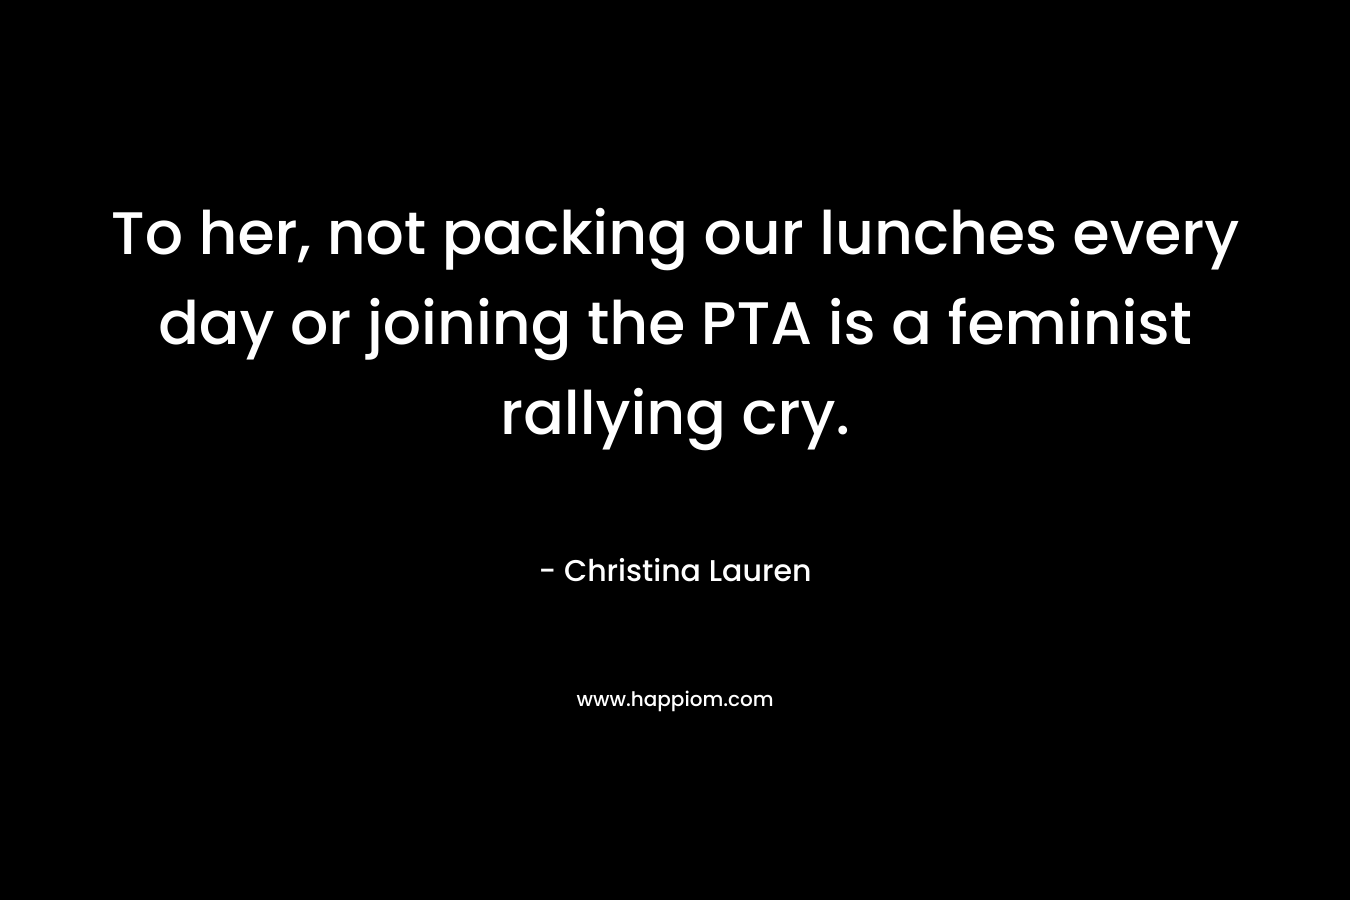 To her, not packing our lunches every day or joining the PTA is a feminist rallying cry. – Christina Lauren